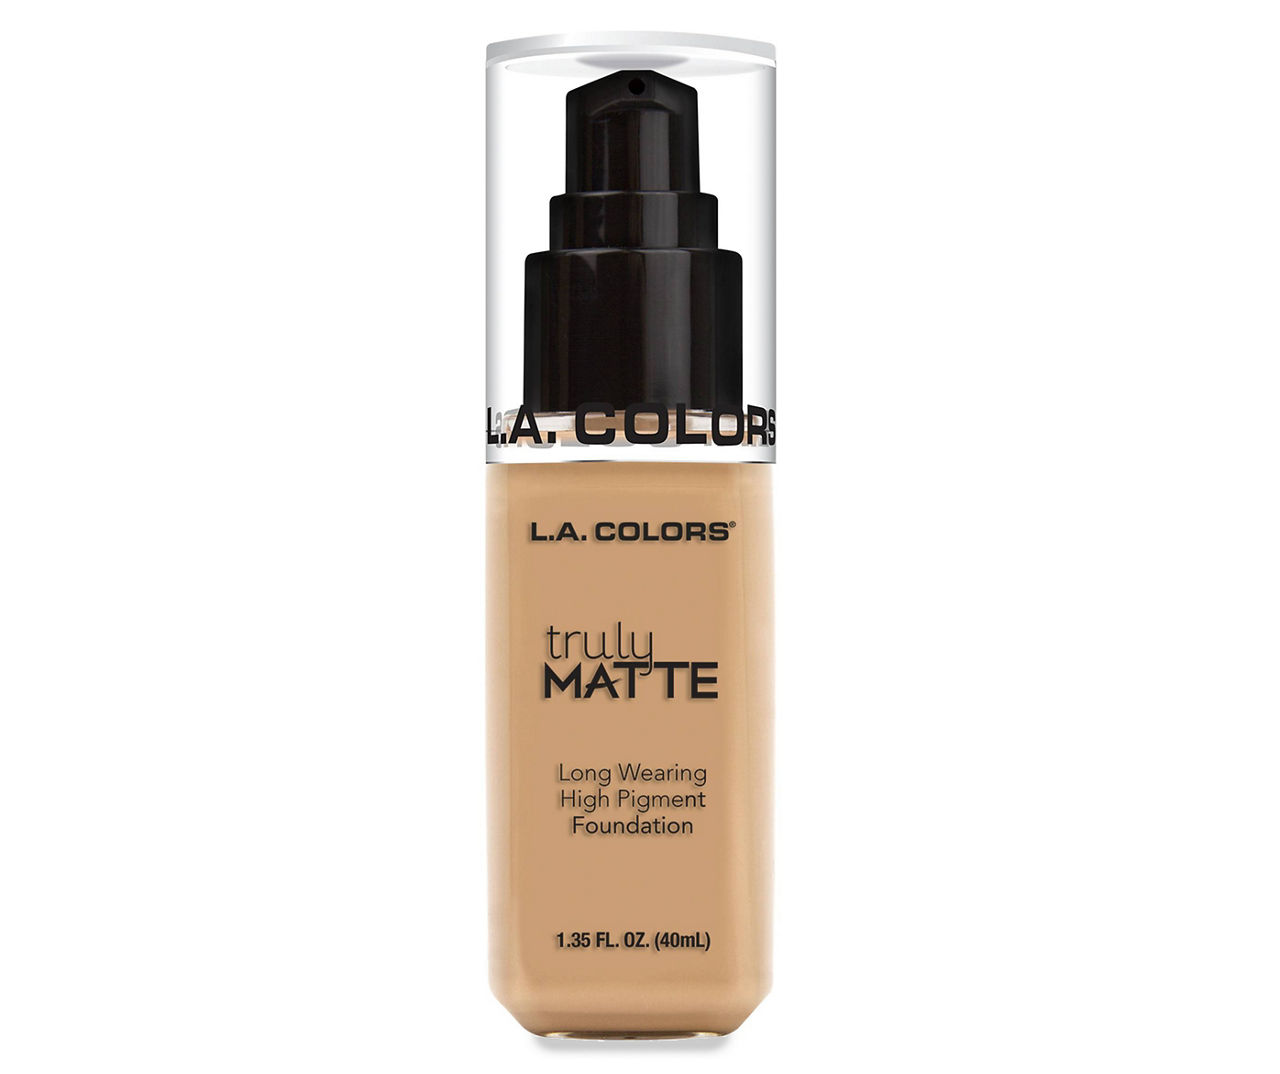 Truly Matte Foundation in Natural